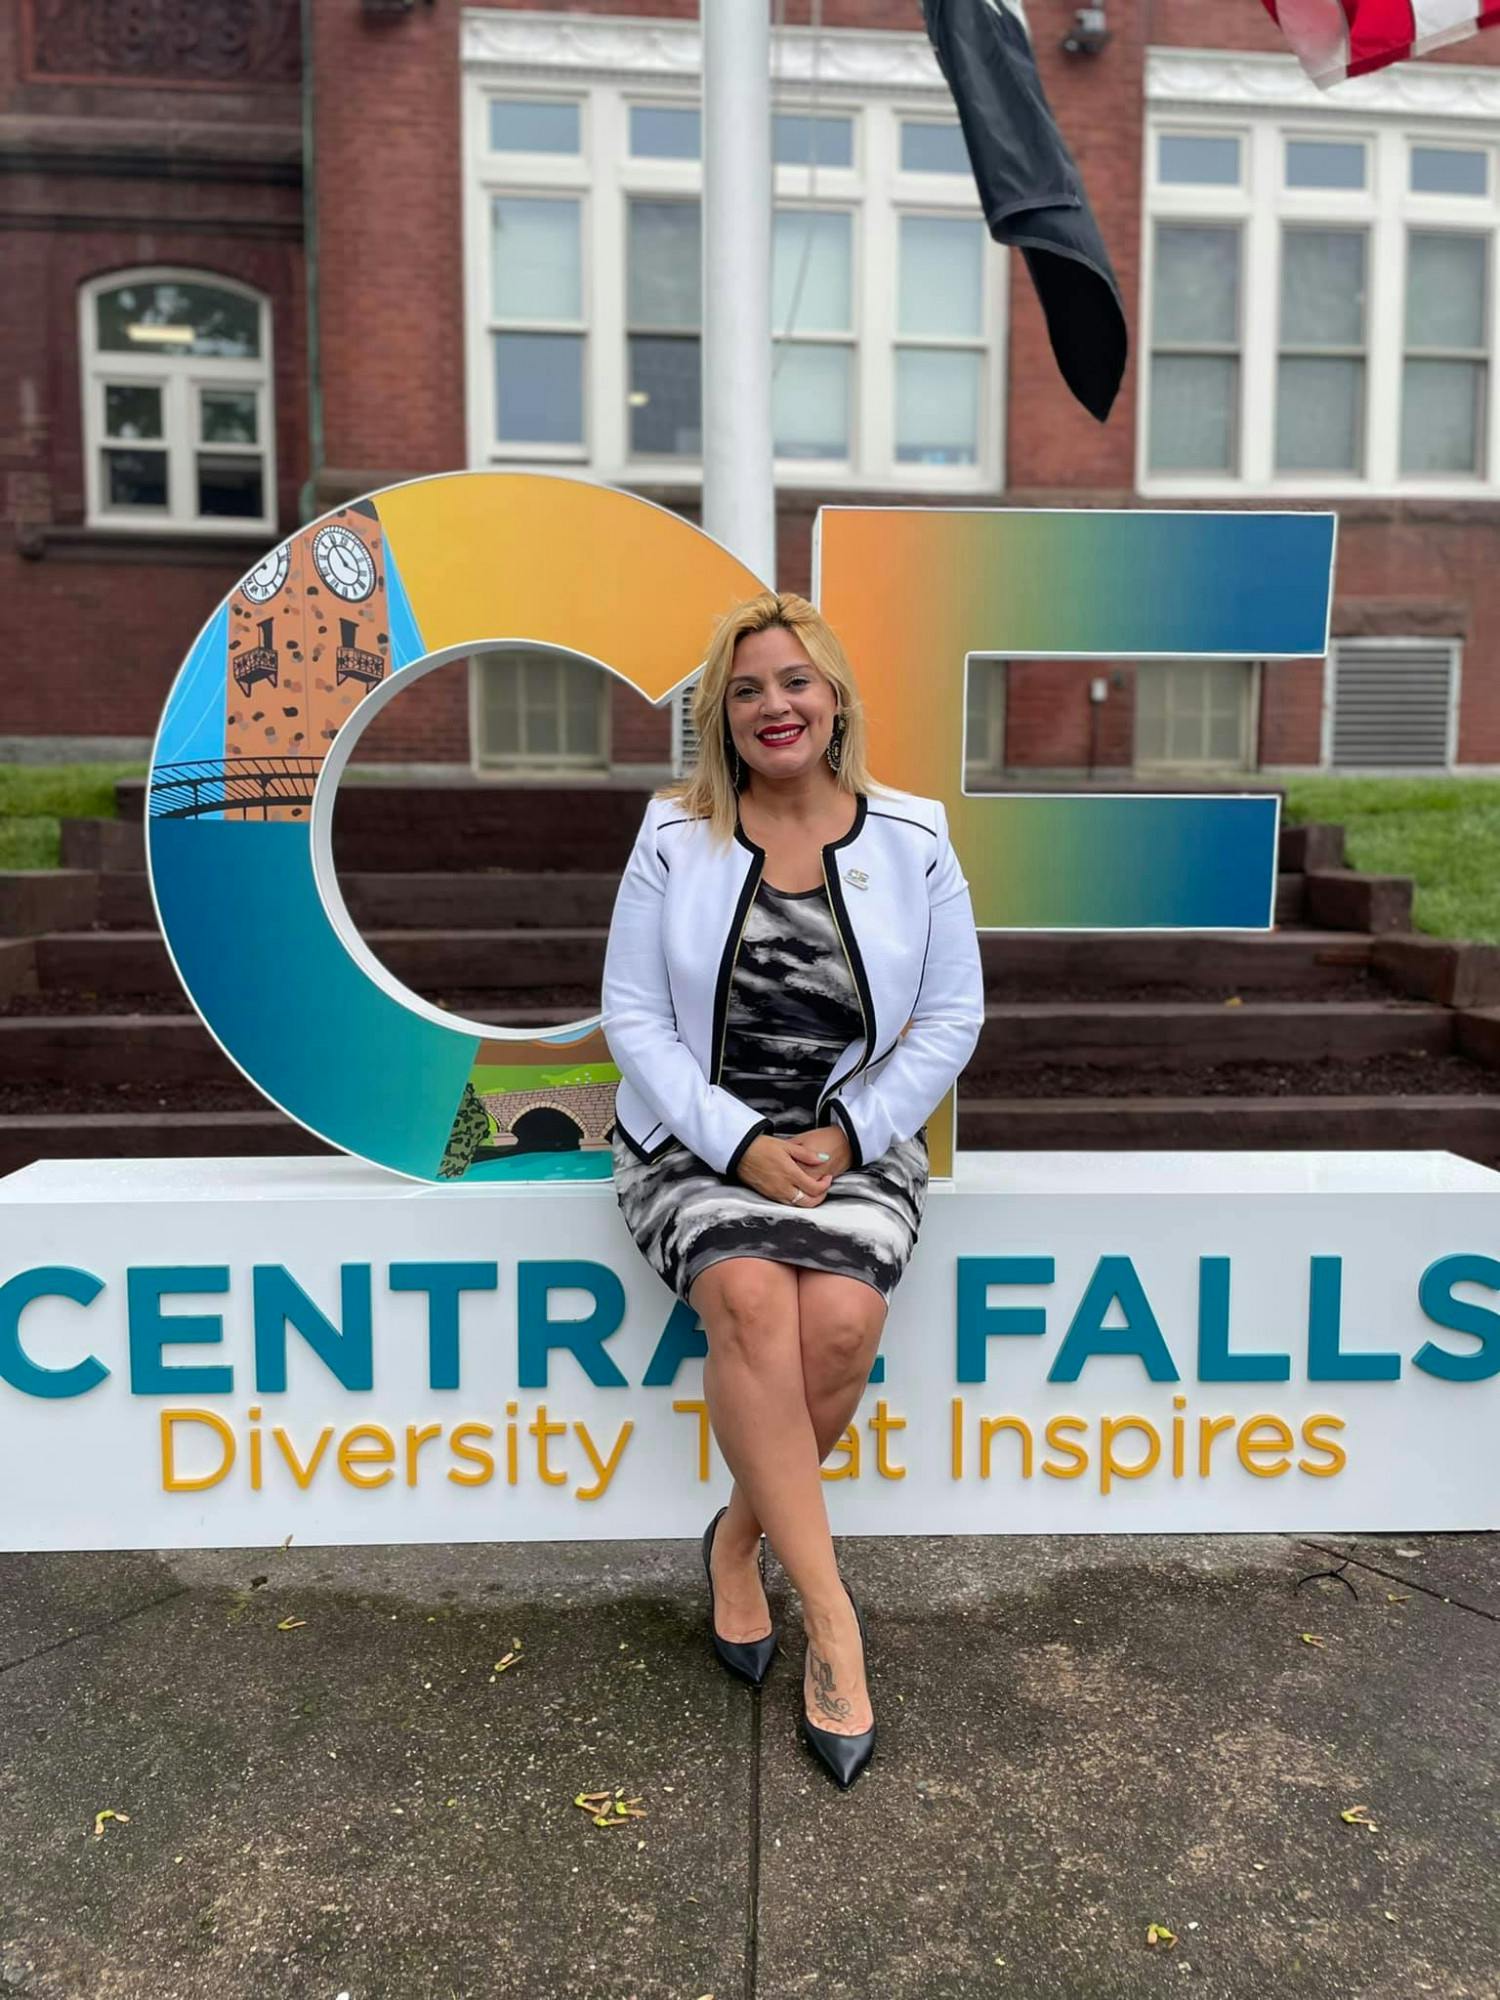 Mayor Maria Rivera of Central Falls reflects on first nine months in office  pic